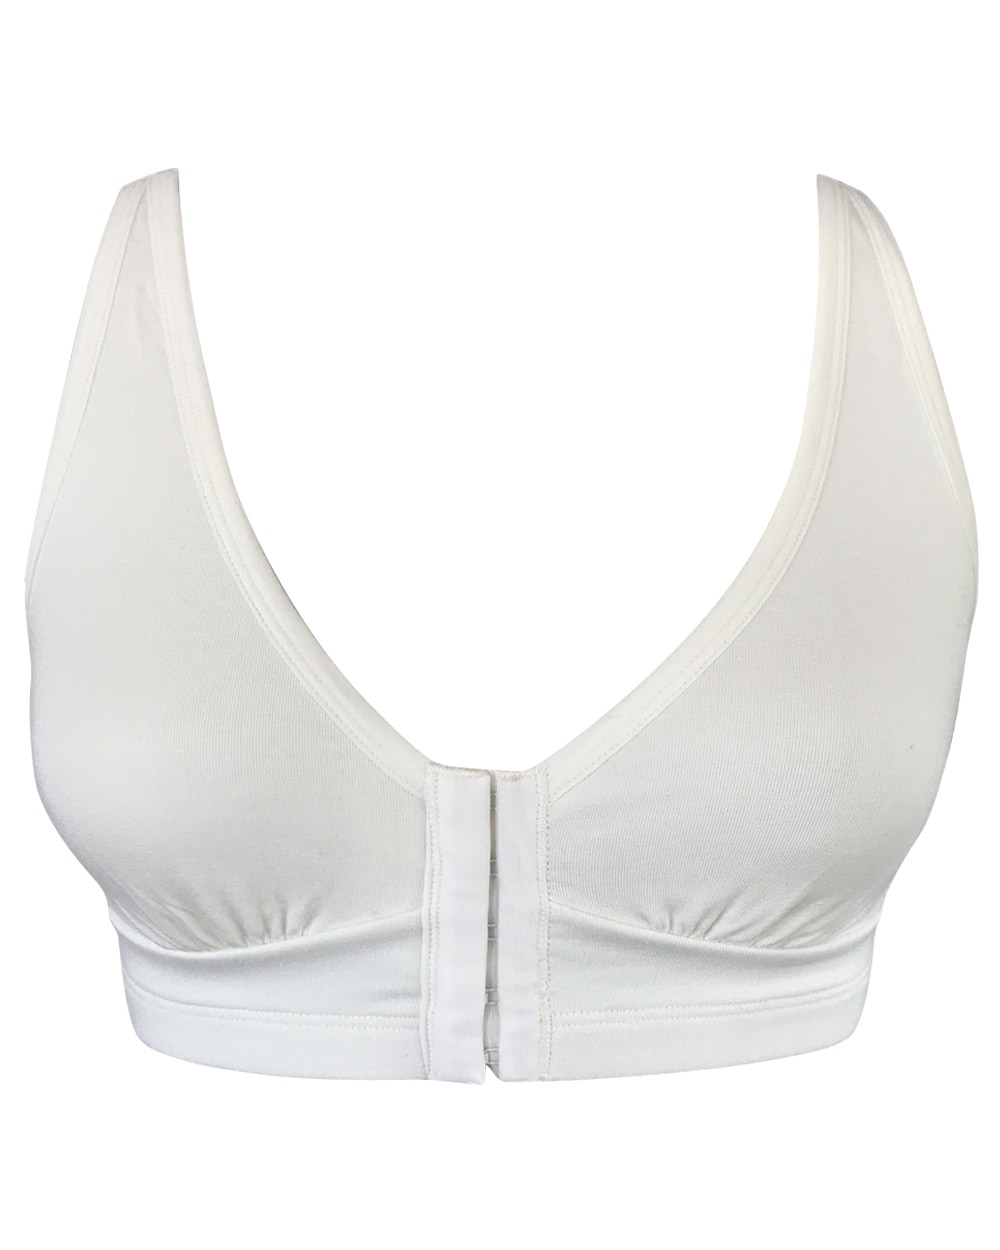 POST SURGICAL COMFORT SUPPORT BRA & BREAST BAND HIGH CONTROL BREAST SURGERY